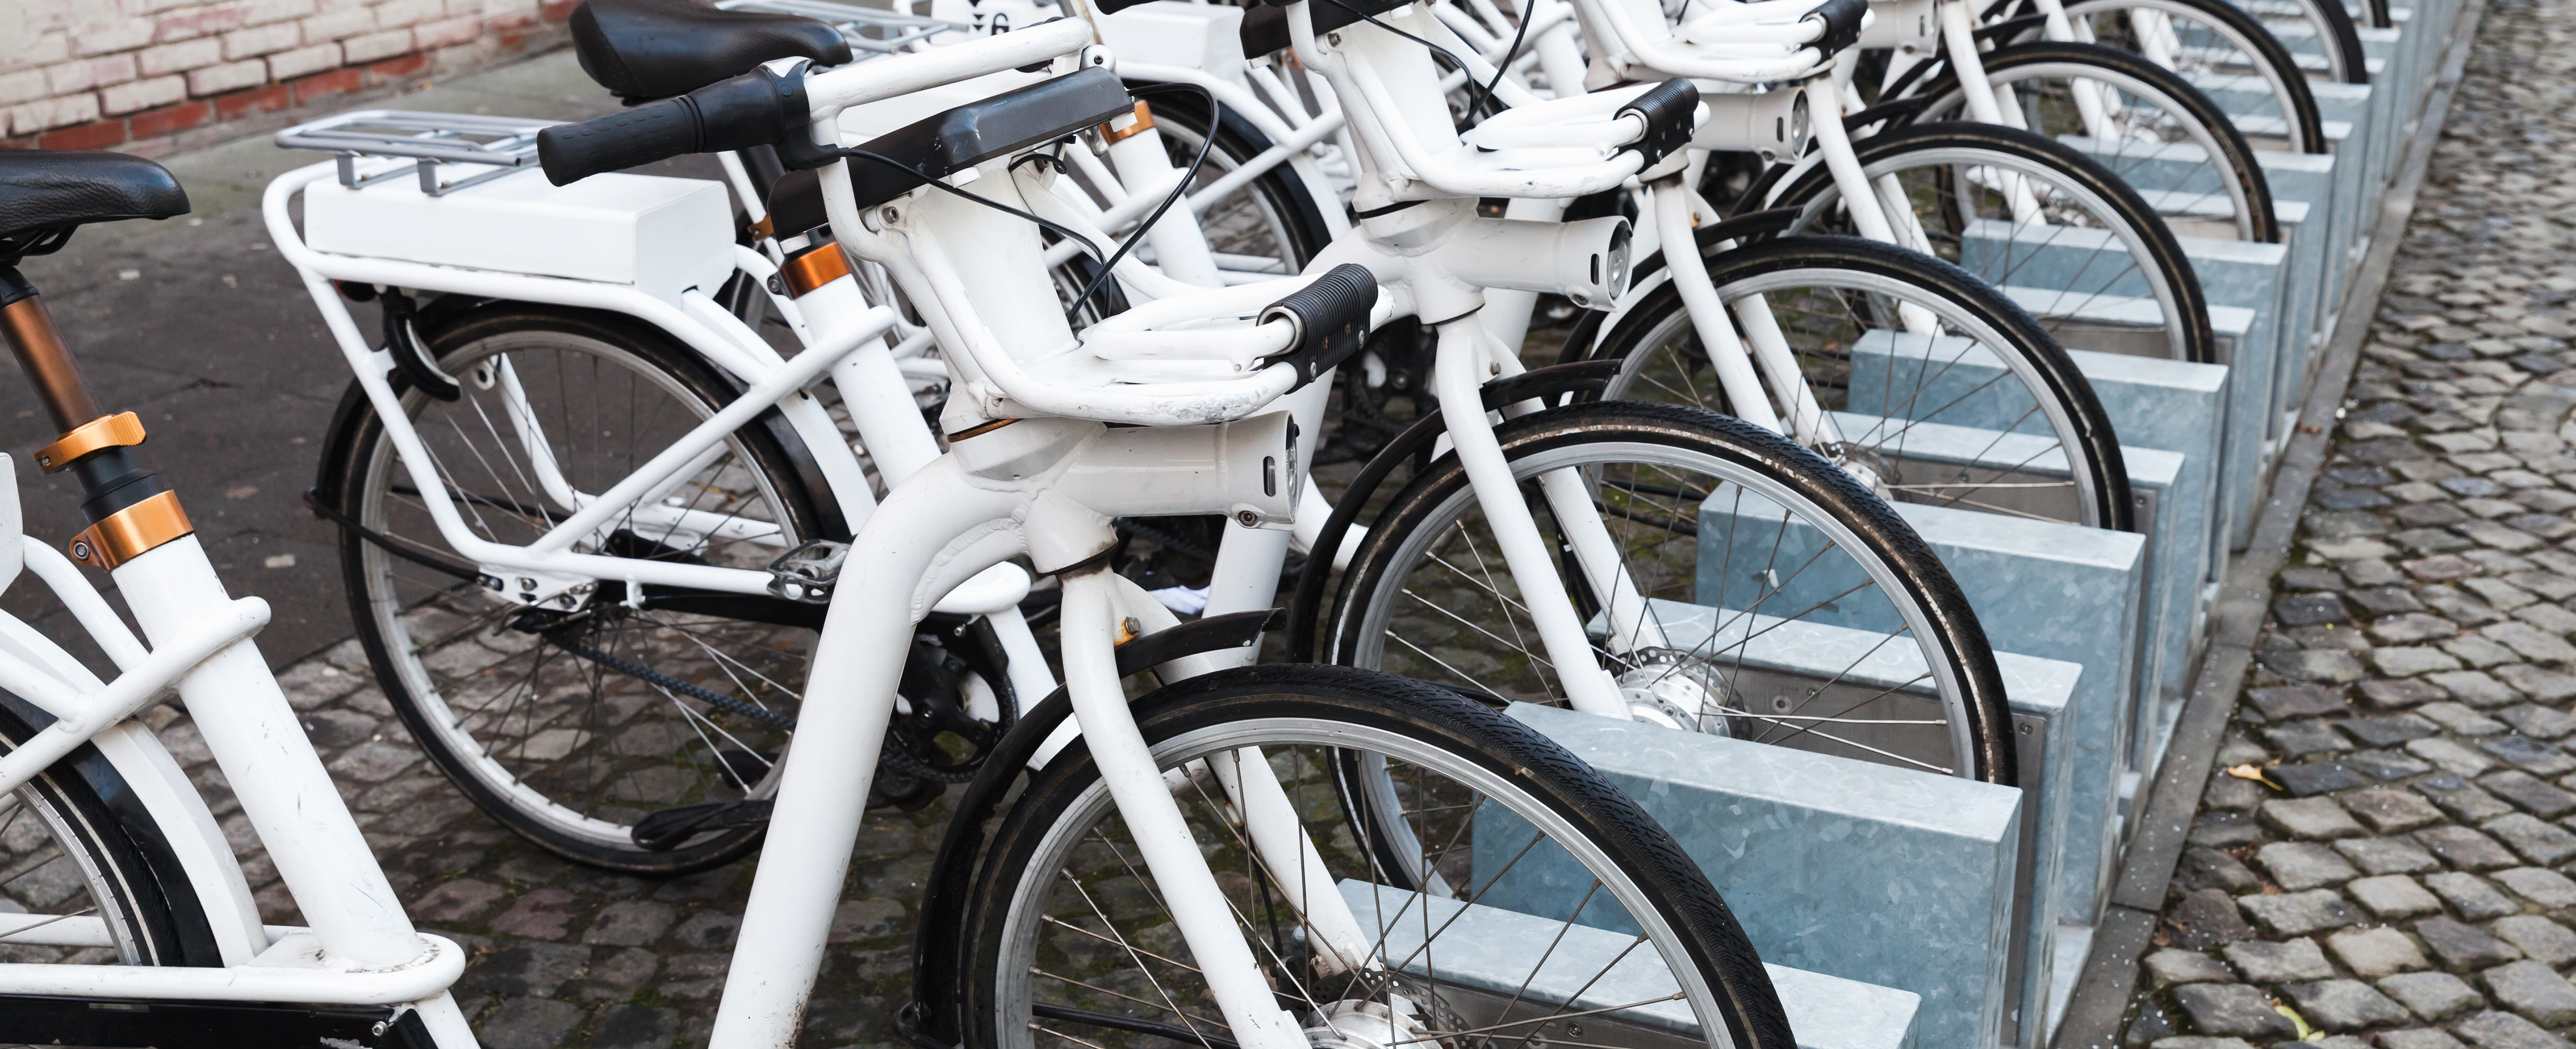 The city bike and bike-share schemes - Cycling Embassy of Denmark